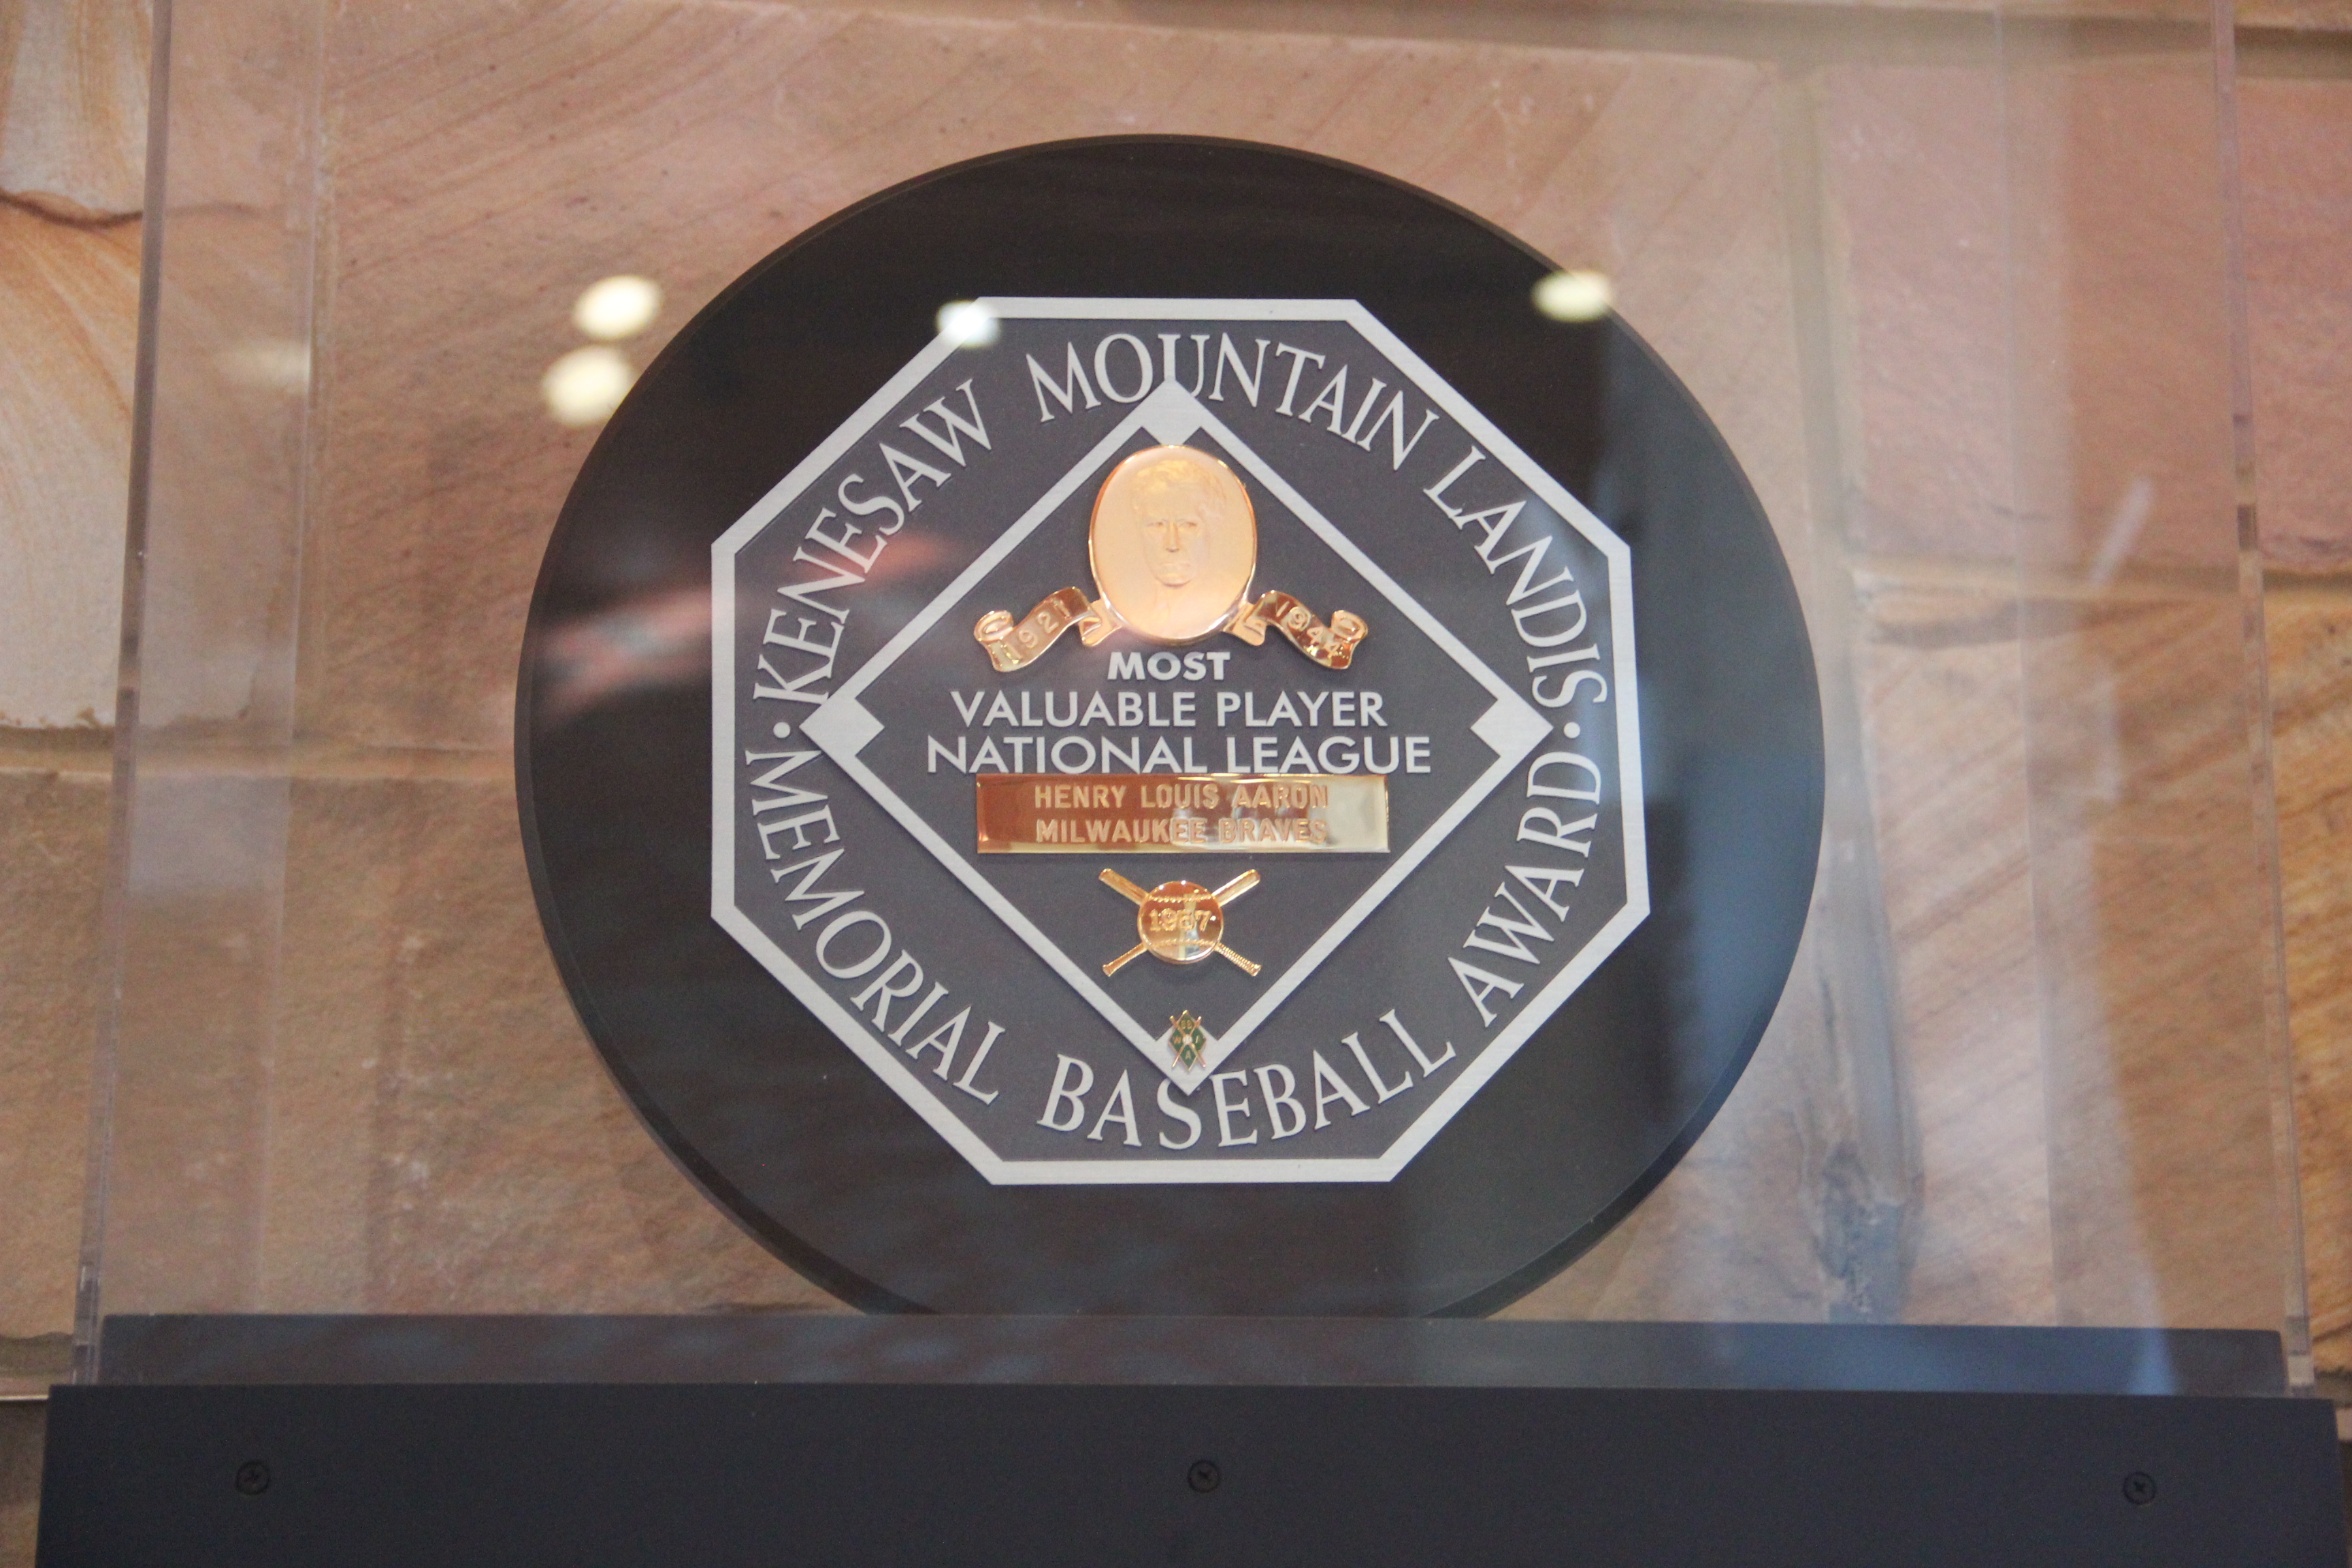 Kevin Mitchell of the Giants is named 1989 National League Most